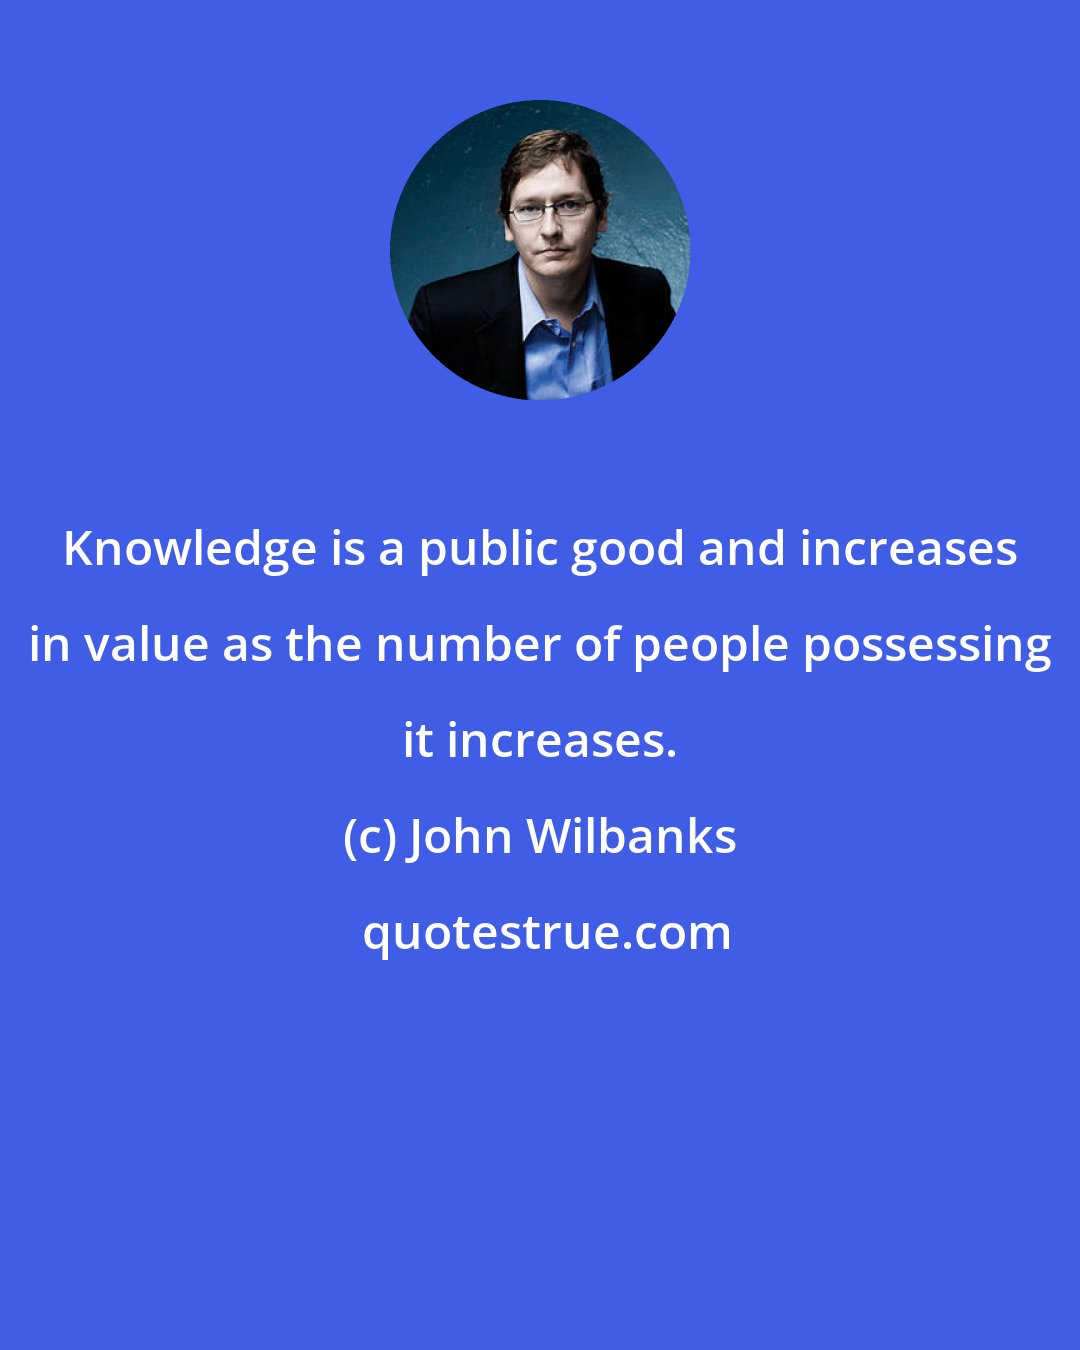 John Wilbanks: Knowledge is a public good and increases in value as the number of people possessing it increases.